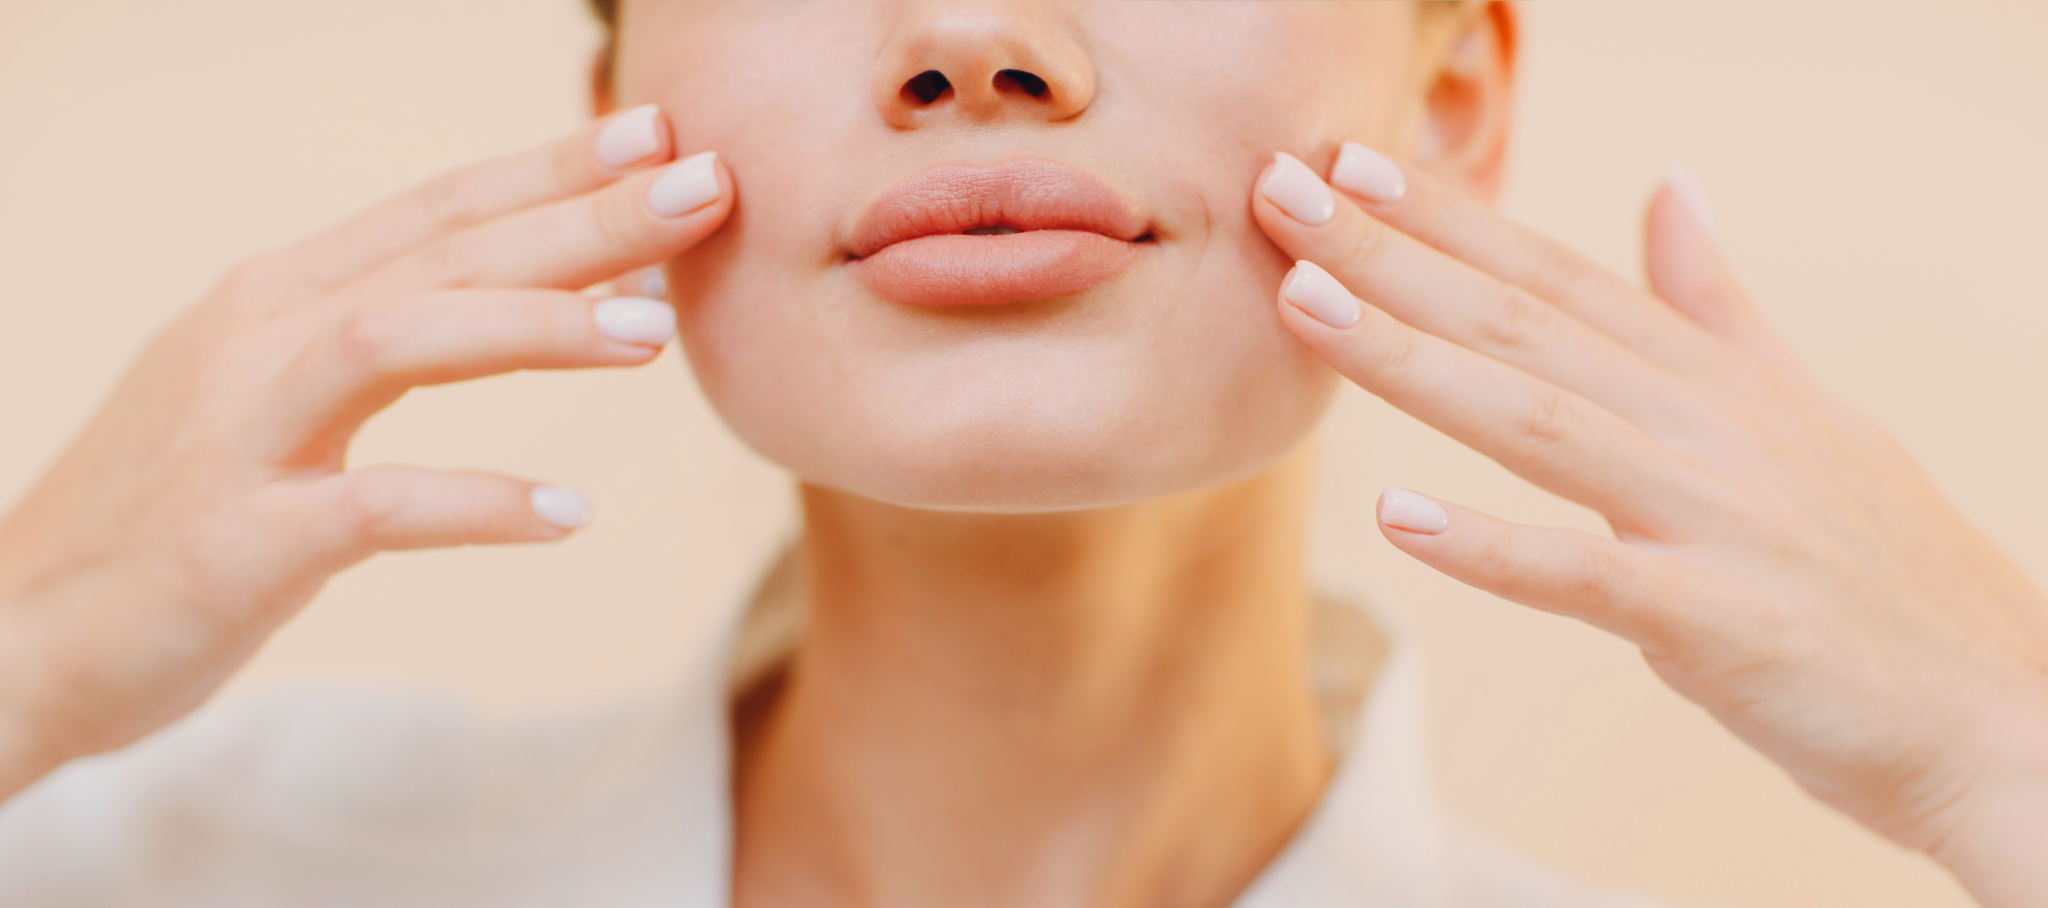 Avaya Aesthetics | Common Misconceptions About Botox and Fillers